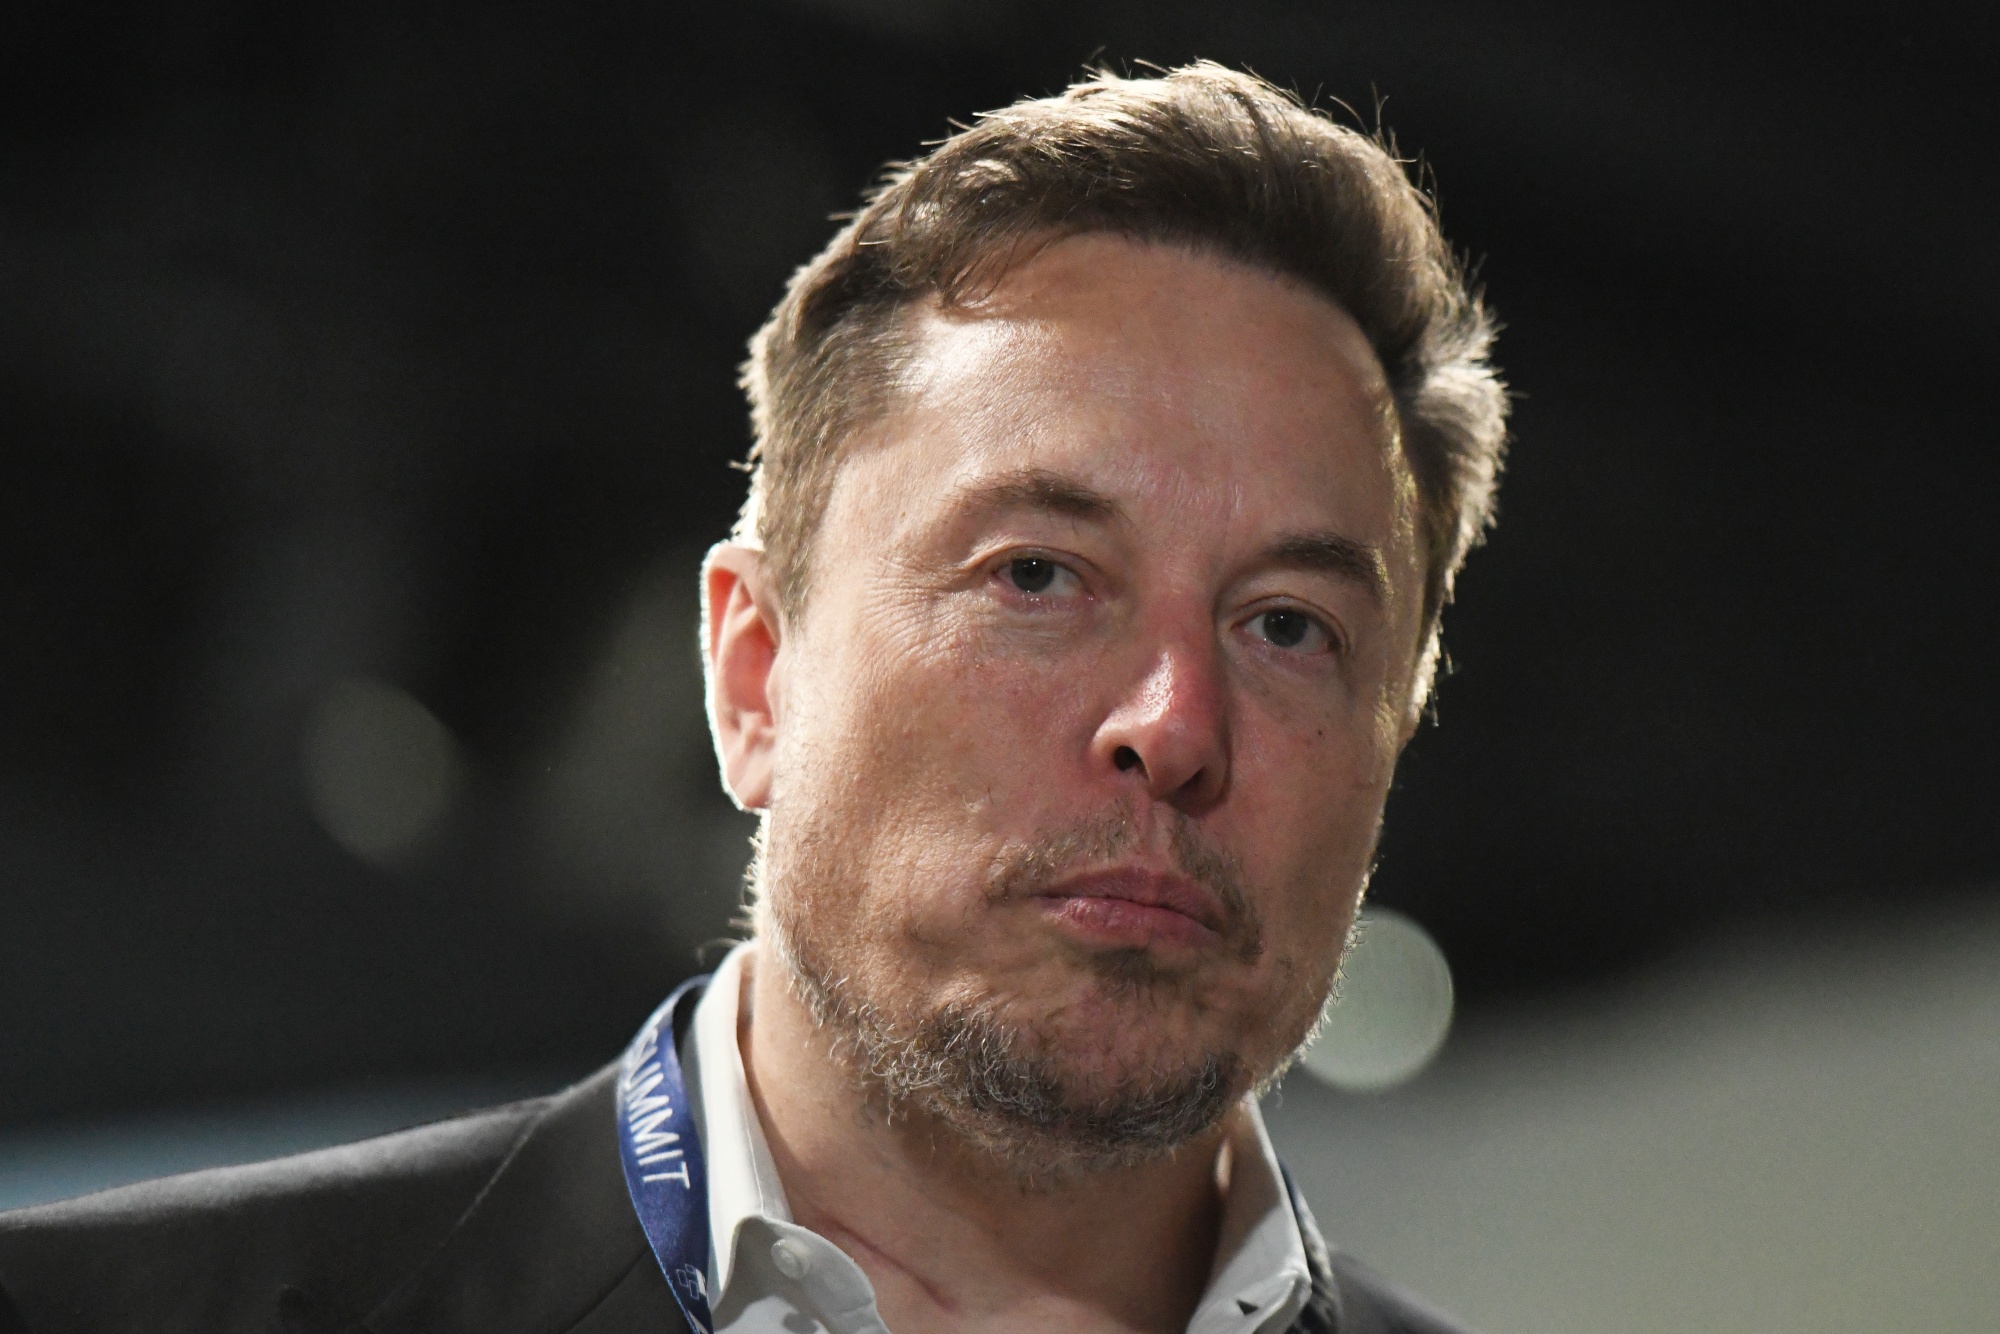 Elon Musk's SpaceX in Hot Water: Inside the Battle Over Worker Rights and Secrets